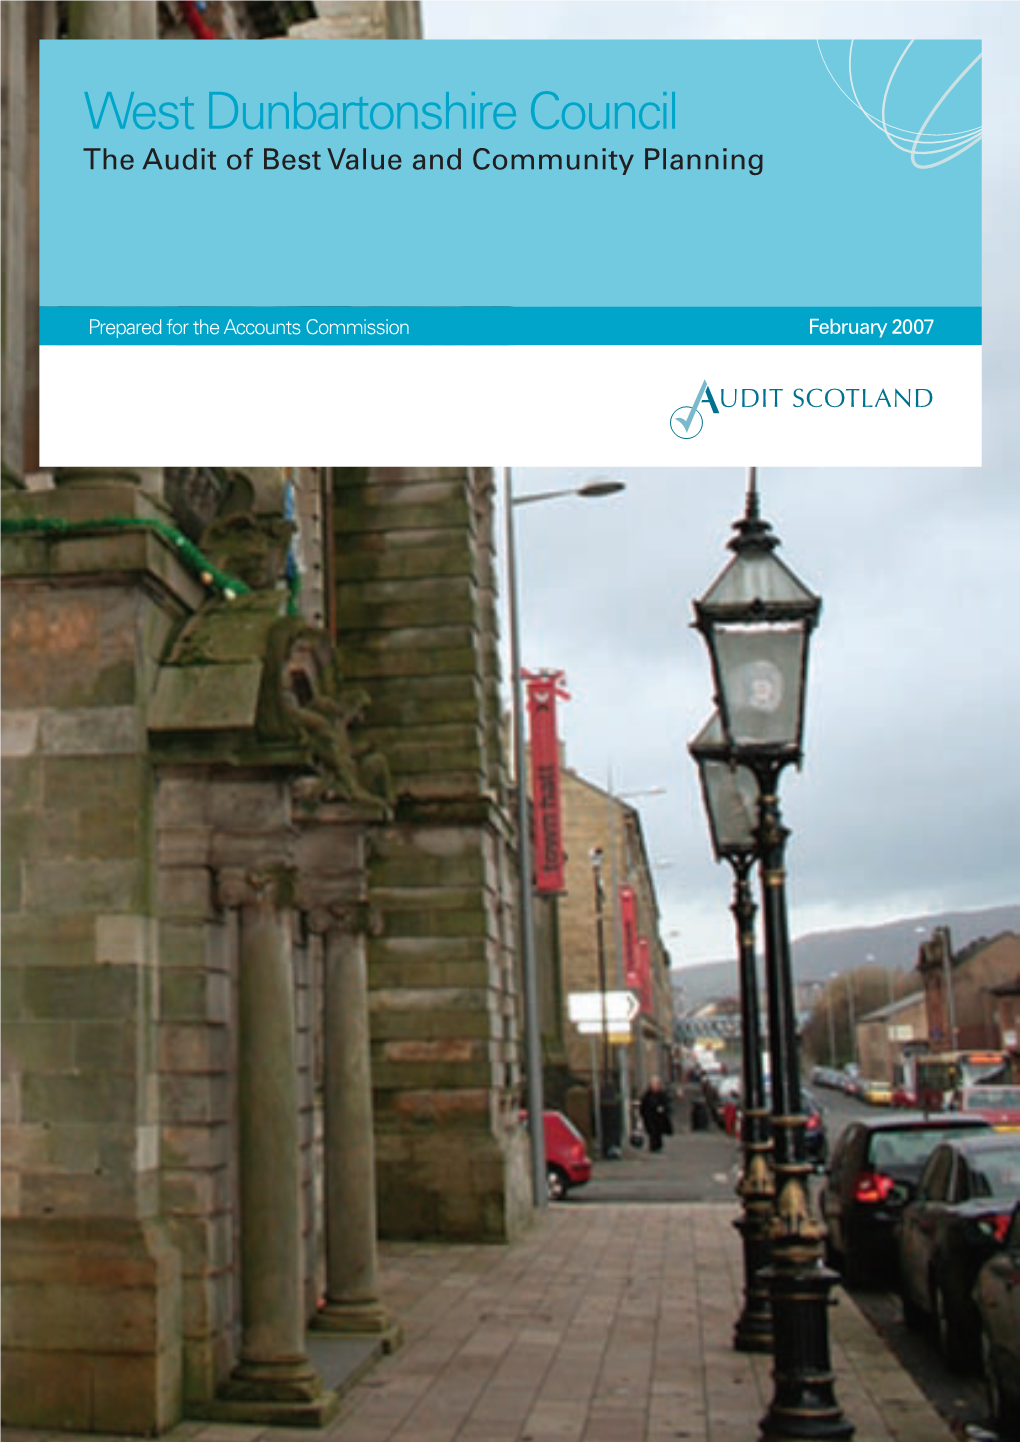 West Dunbartonshire Council: the Audit of Best Value and Community